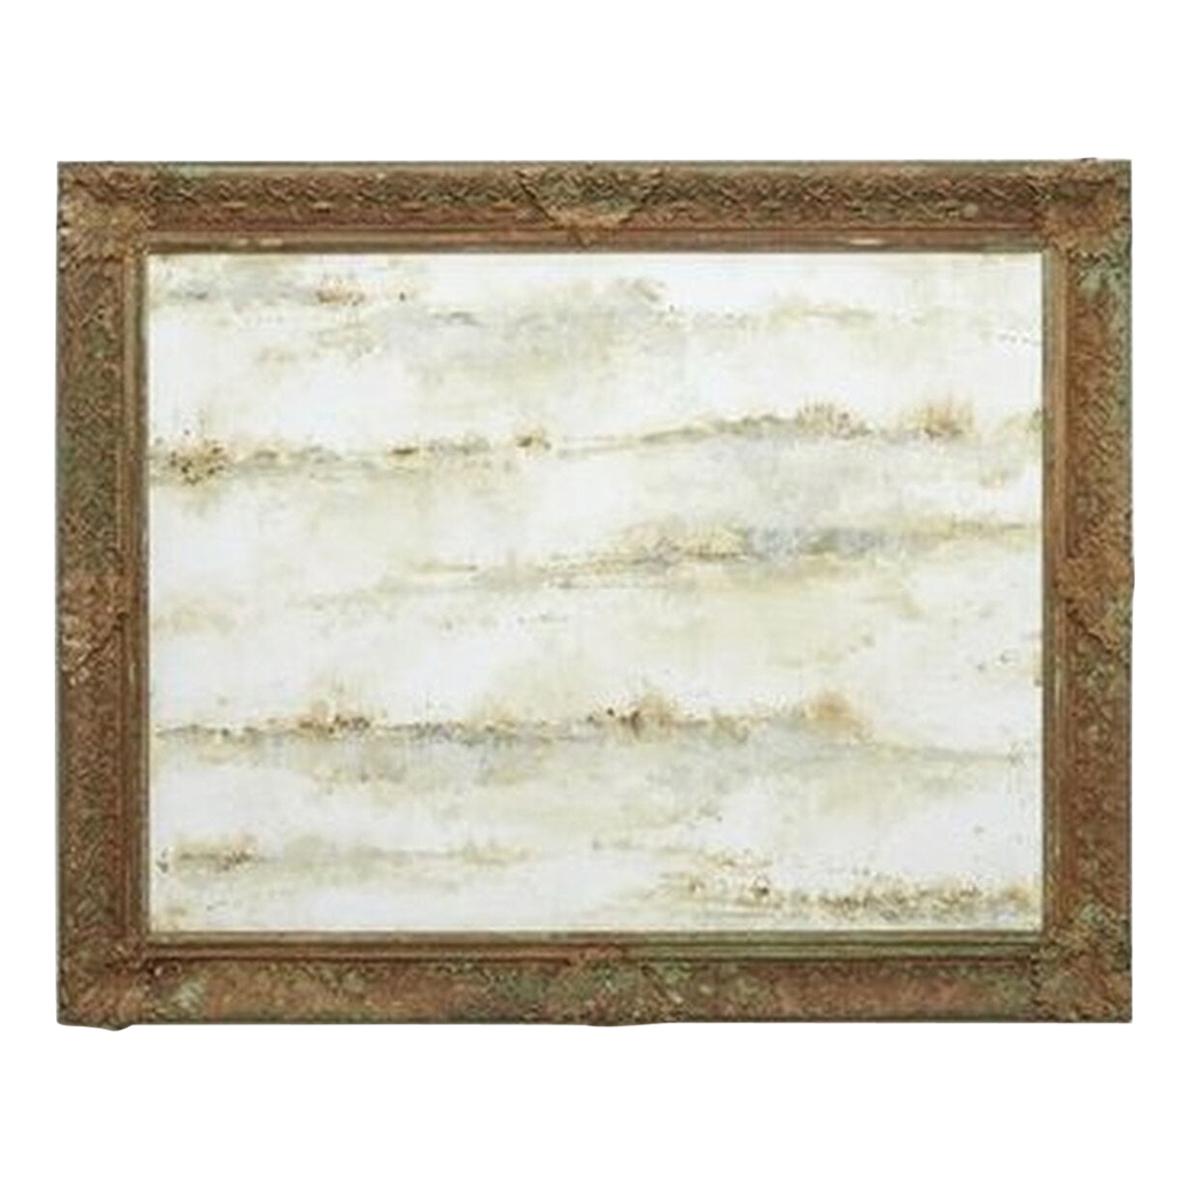 "Tidal Gloaming" Original Watercolor on Birch by Artist Kim Petty, Antique Frame For Sale